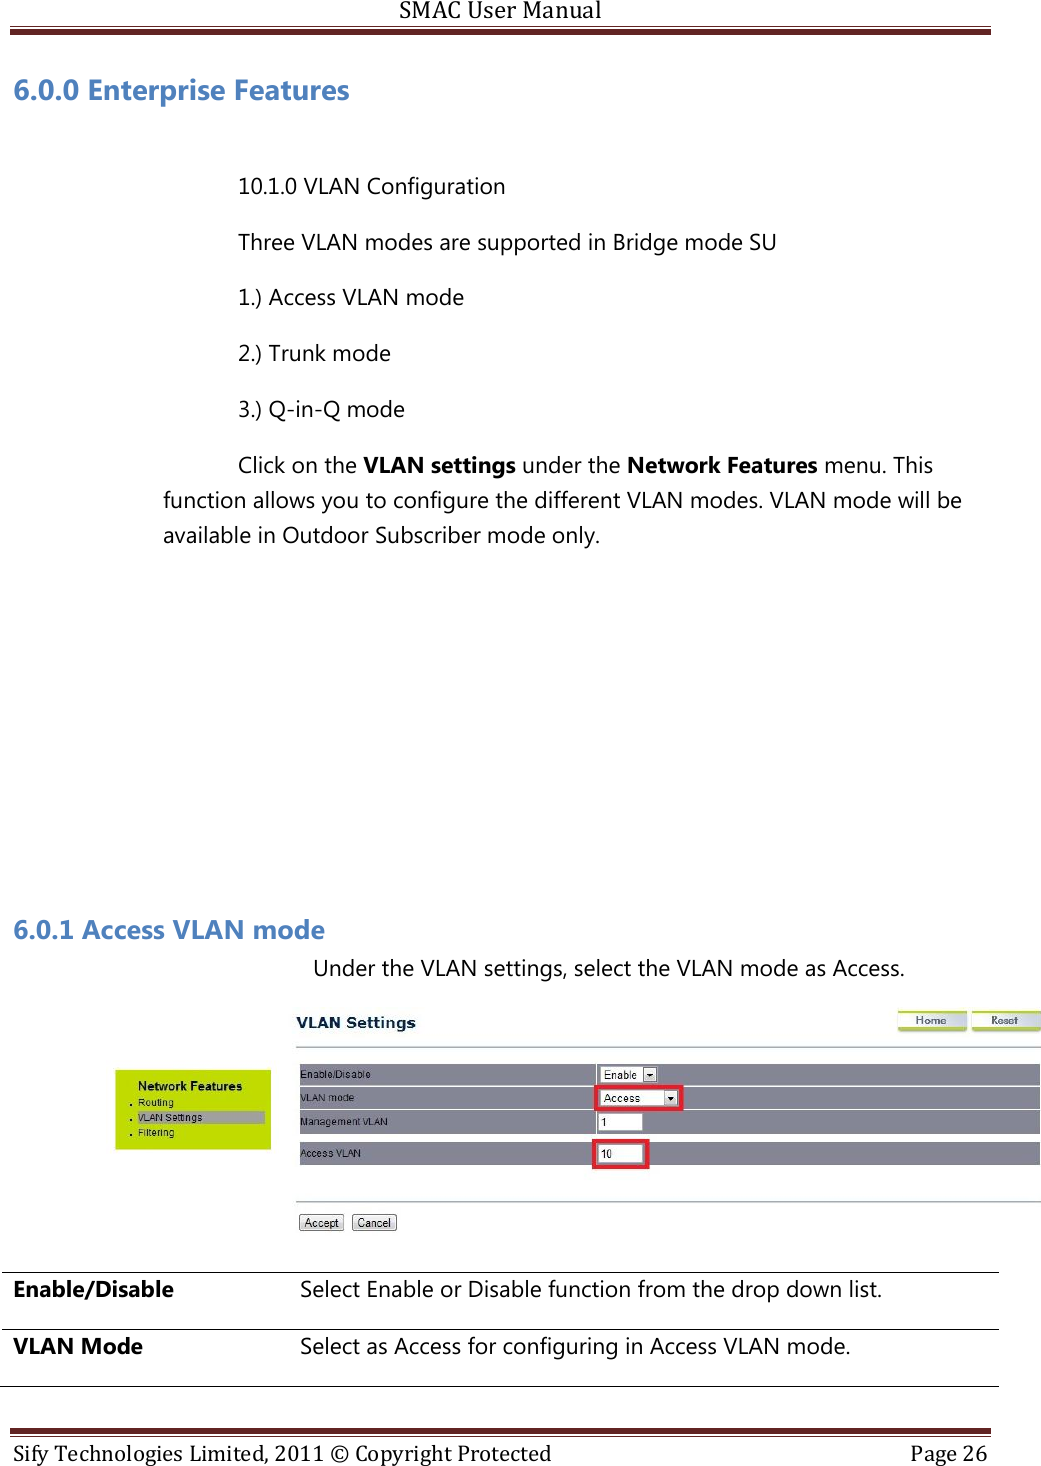 SMAC User Manual  Sify Technologies Limited, 2011 © Copyright Protected  Page 26  6.0.0 Enterprise Features  10.1.0 VLAN Configuration Three VLAN modes are supported in Bridge mode SU 1.) Access VLAN mode 2.) Trunk mode 3.) Q-in-Q mode Click on the VLAN settings under the Network Features menu. This function allows you to configure the different VLAN modes. VLAN mode will be available in Outdoor Subscriber mode only.       6.0.1 Access VLAN mode   Under the VLAN settings, select the VLAN mode as Access.  Enable/Disable Select Enable or Disable function from the drop down list. VLAN Mode Select as Access for configuring in Access VLAN mode. 